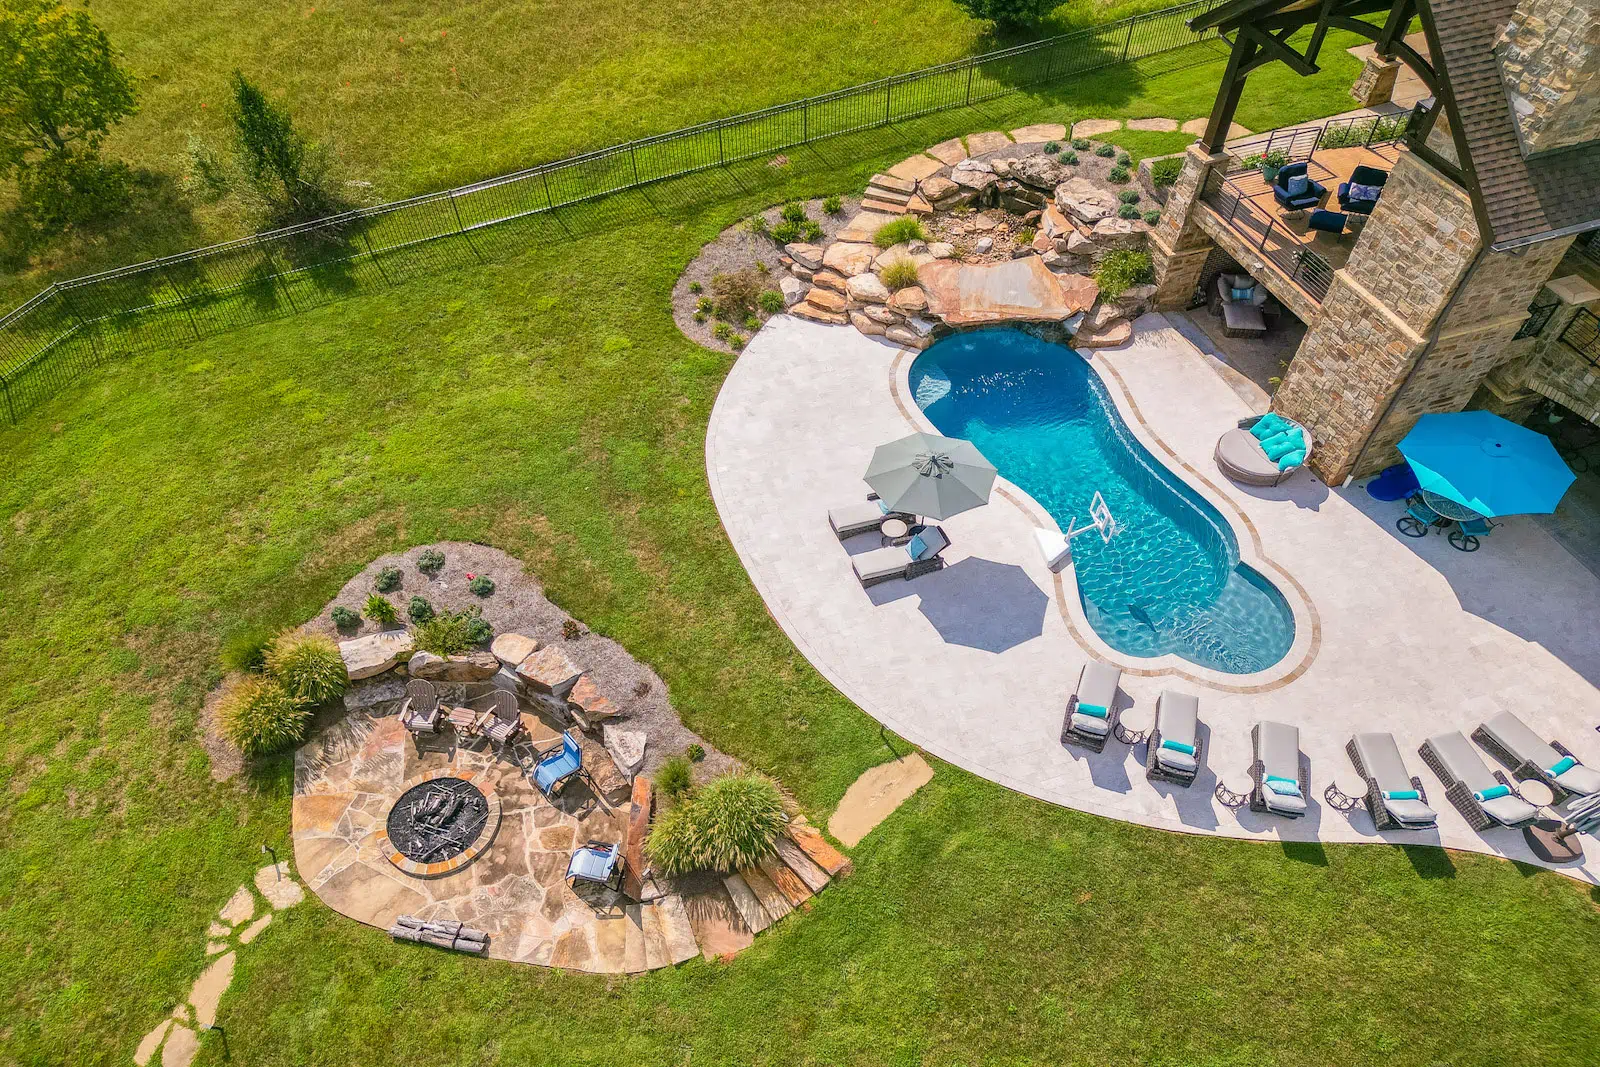 Leisure Pools Eclipse™ - let us install your pool in Knox County, TN